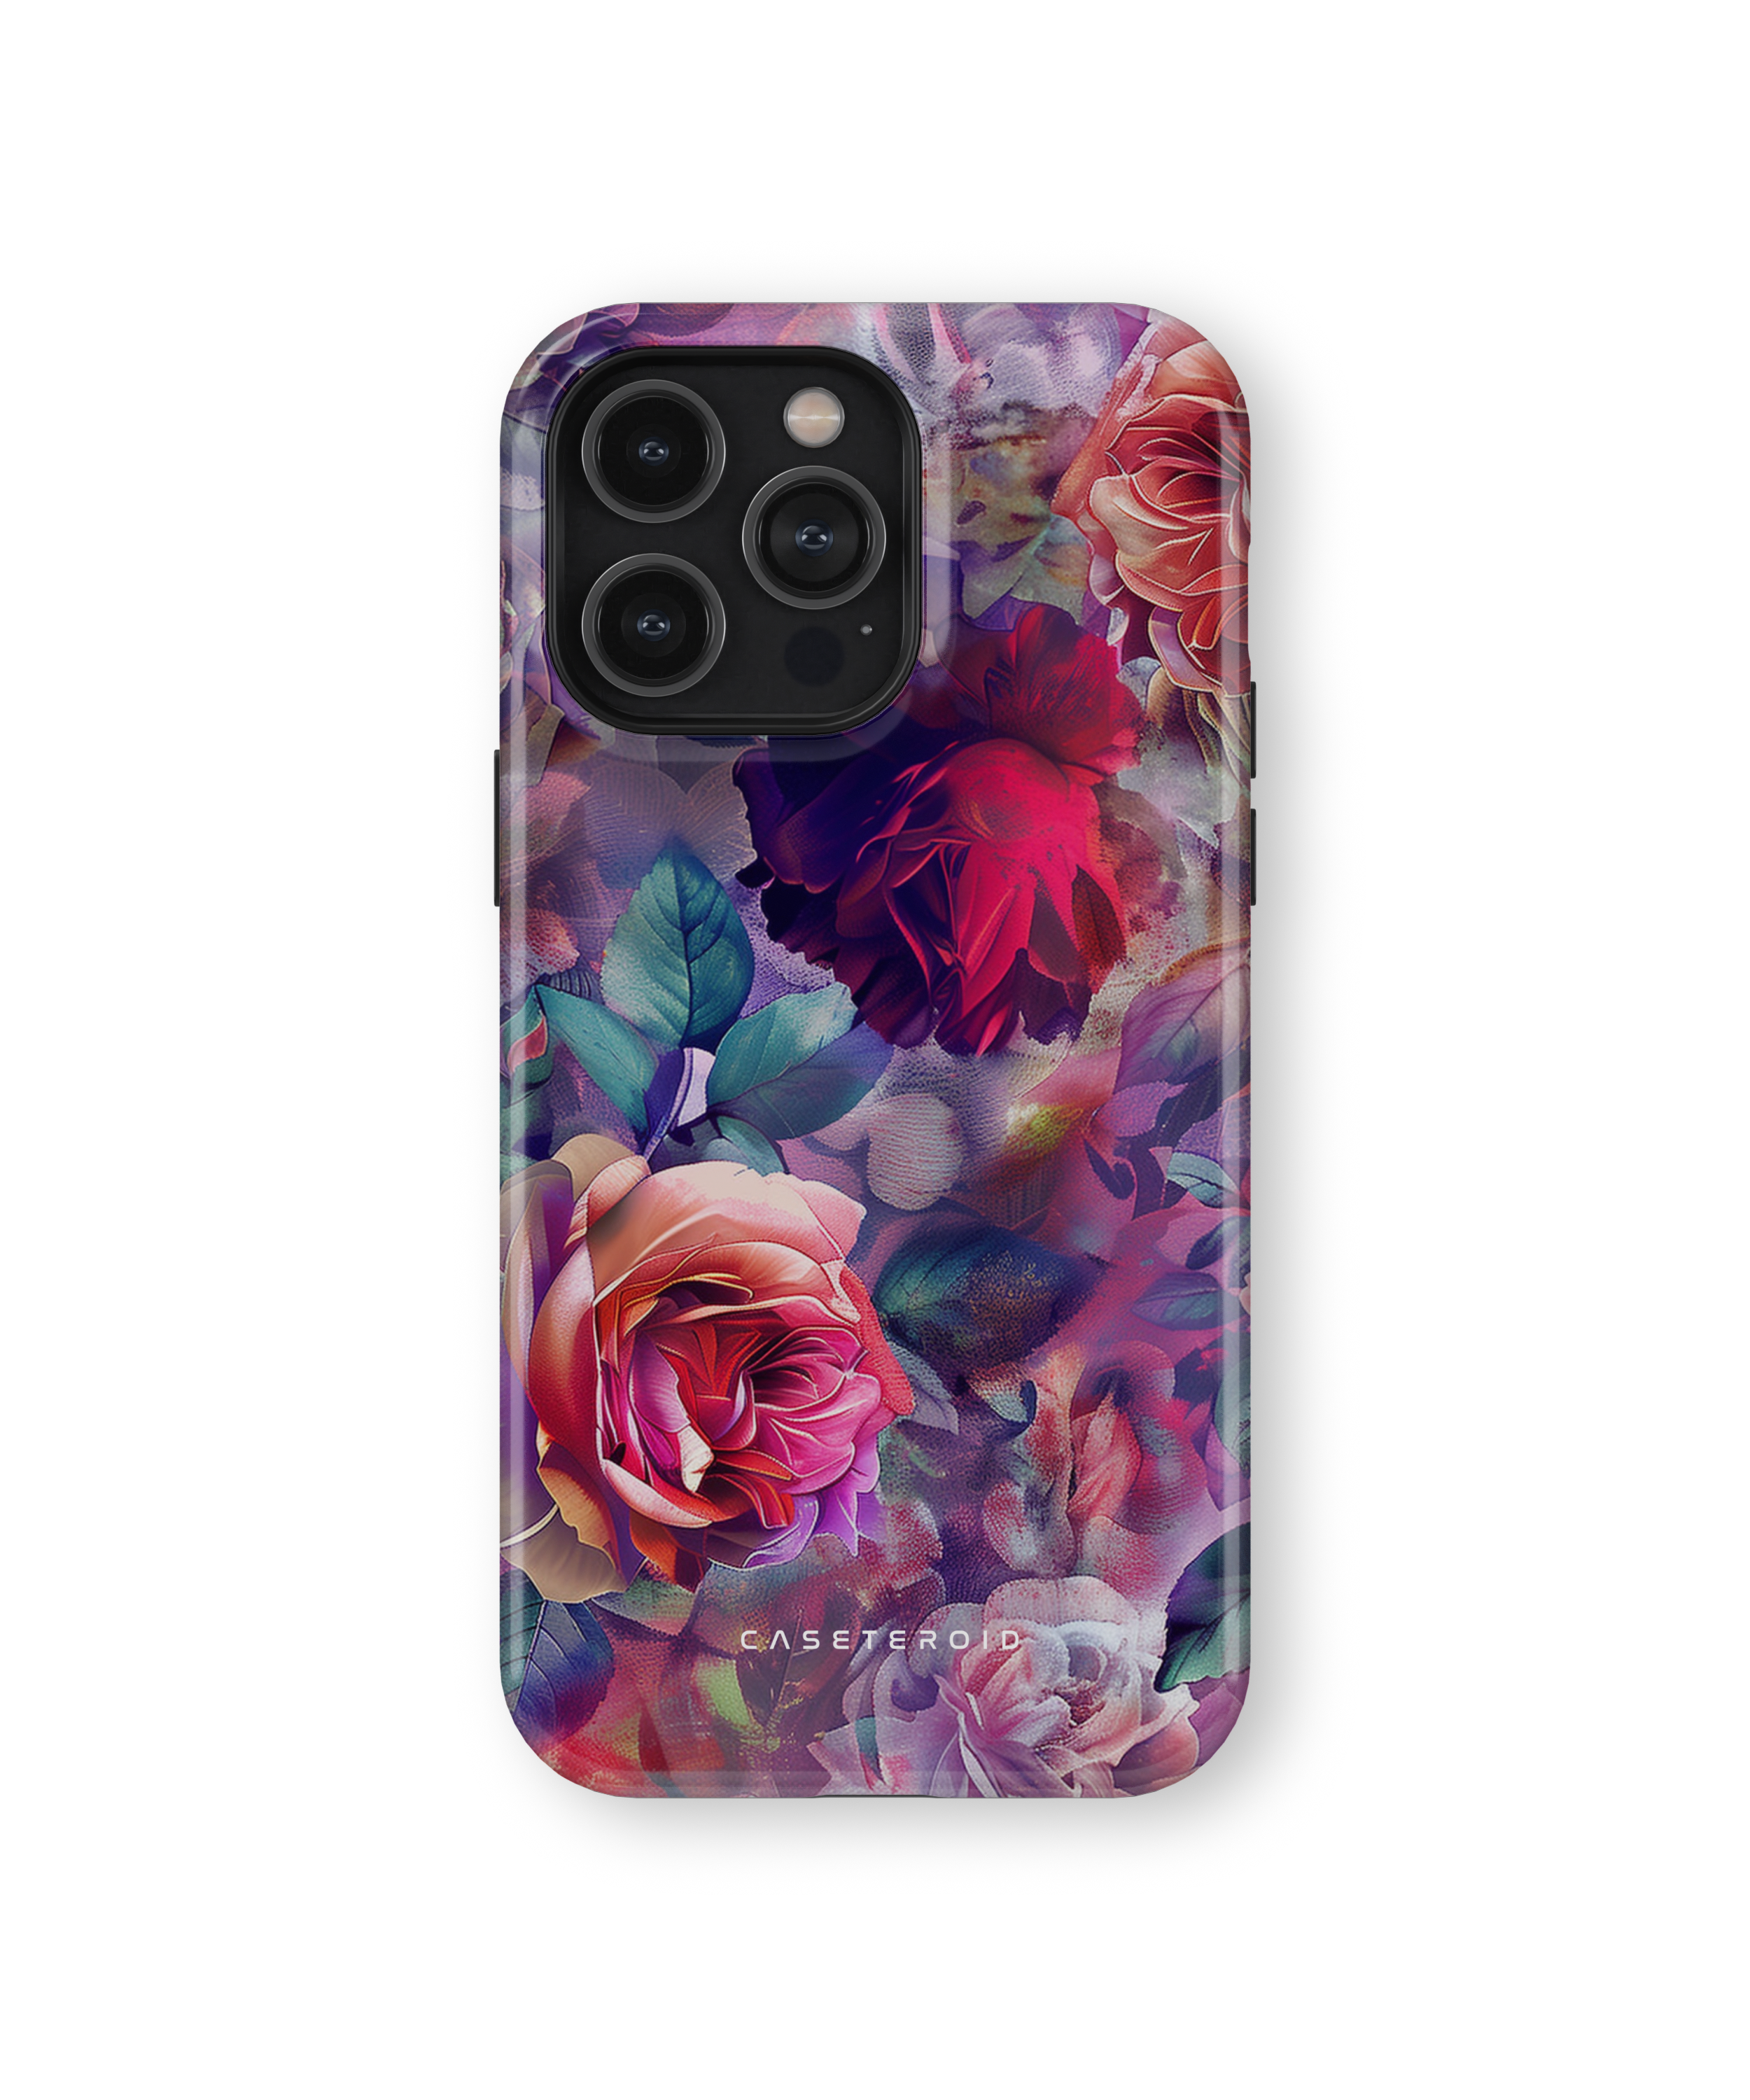 iPhone Tough Case with MagSafe - Rose Serenade Bloom - CASETEROID